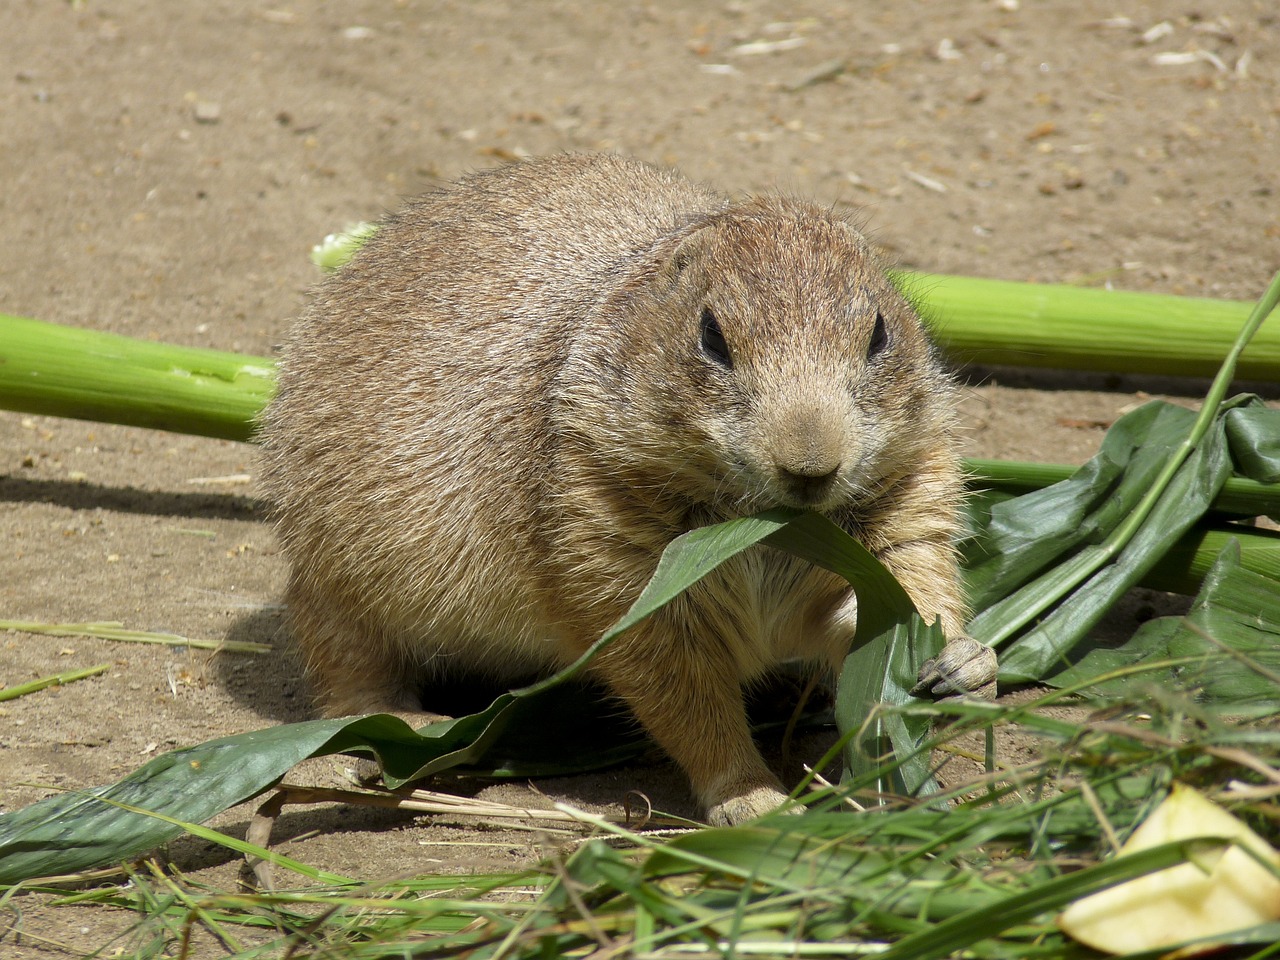 a close up of a small animal eating leaves, a photo, gopher, grain”, 2 0 1 0 photo, highly detailed photo